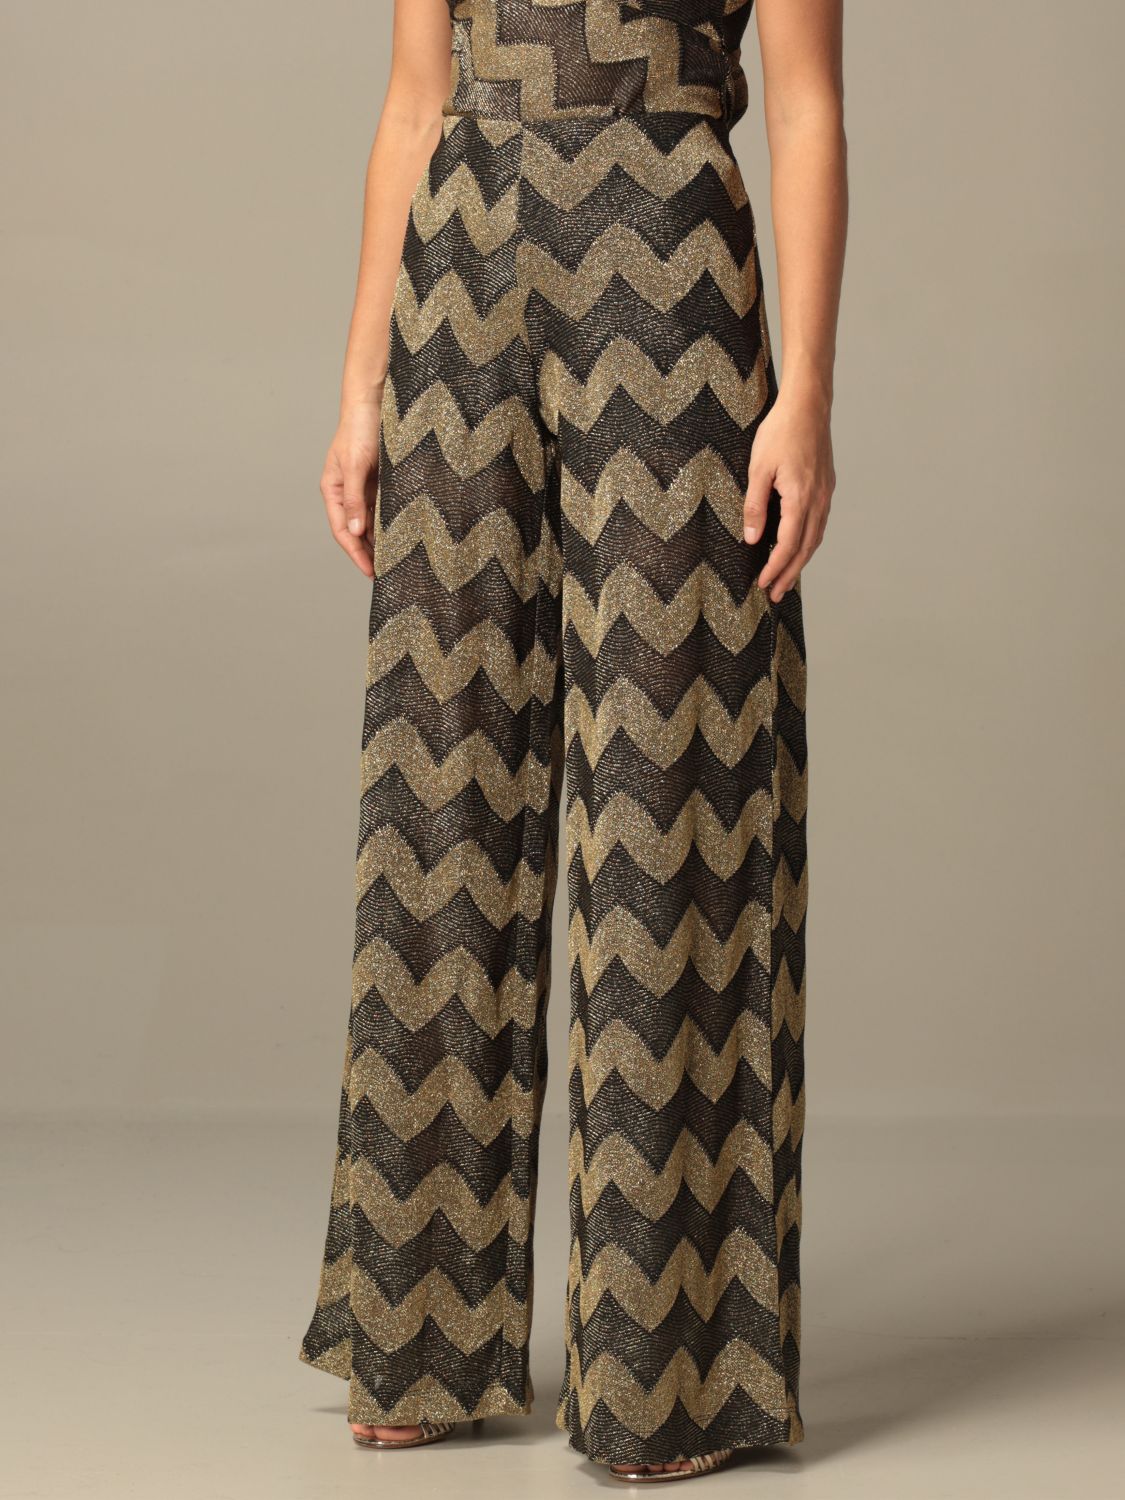 M MISSONI: pants for woman - Black | M pants 2DI00197 online on GIGLIO.COM